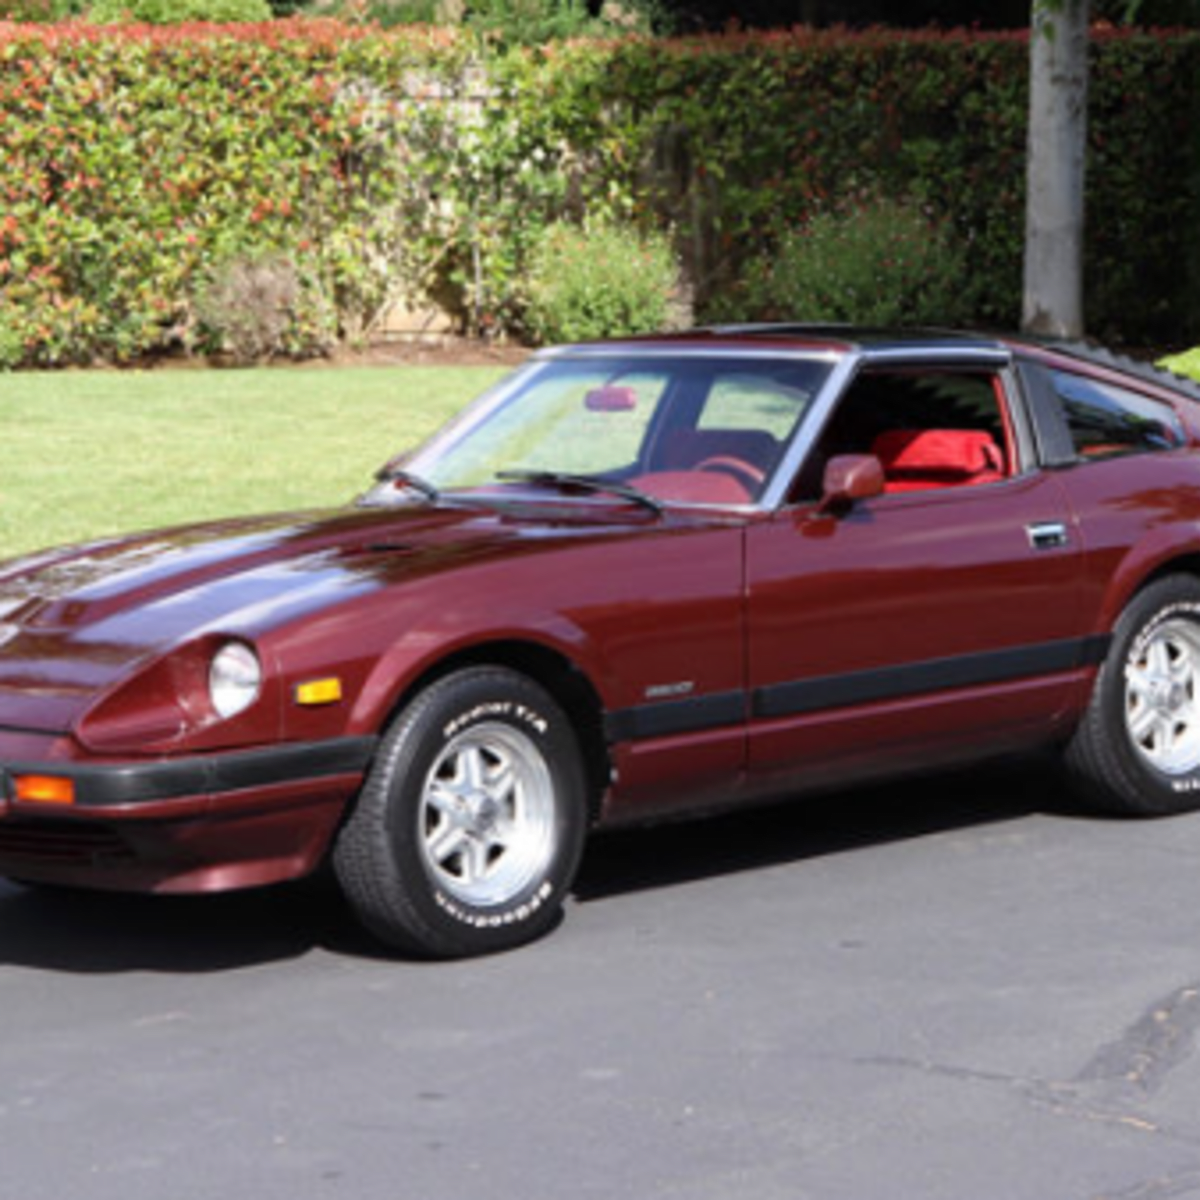 Car of the Week: 1982 Datsun 280ZX - Old Cars Weekly